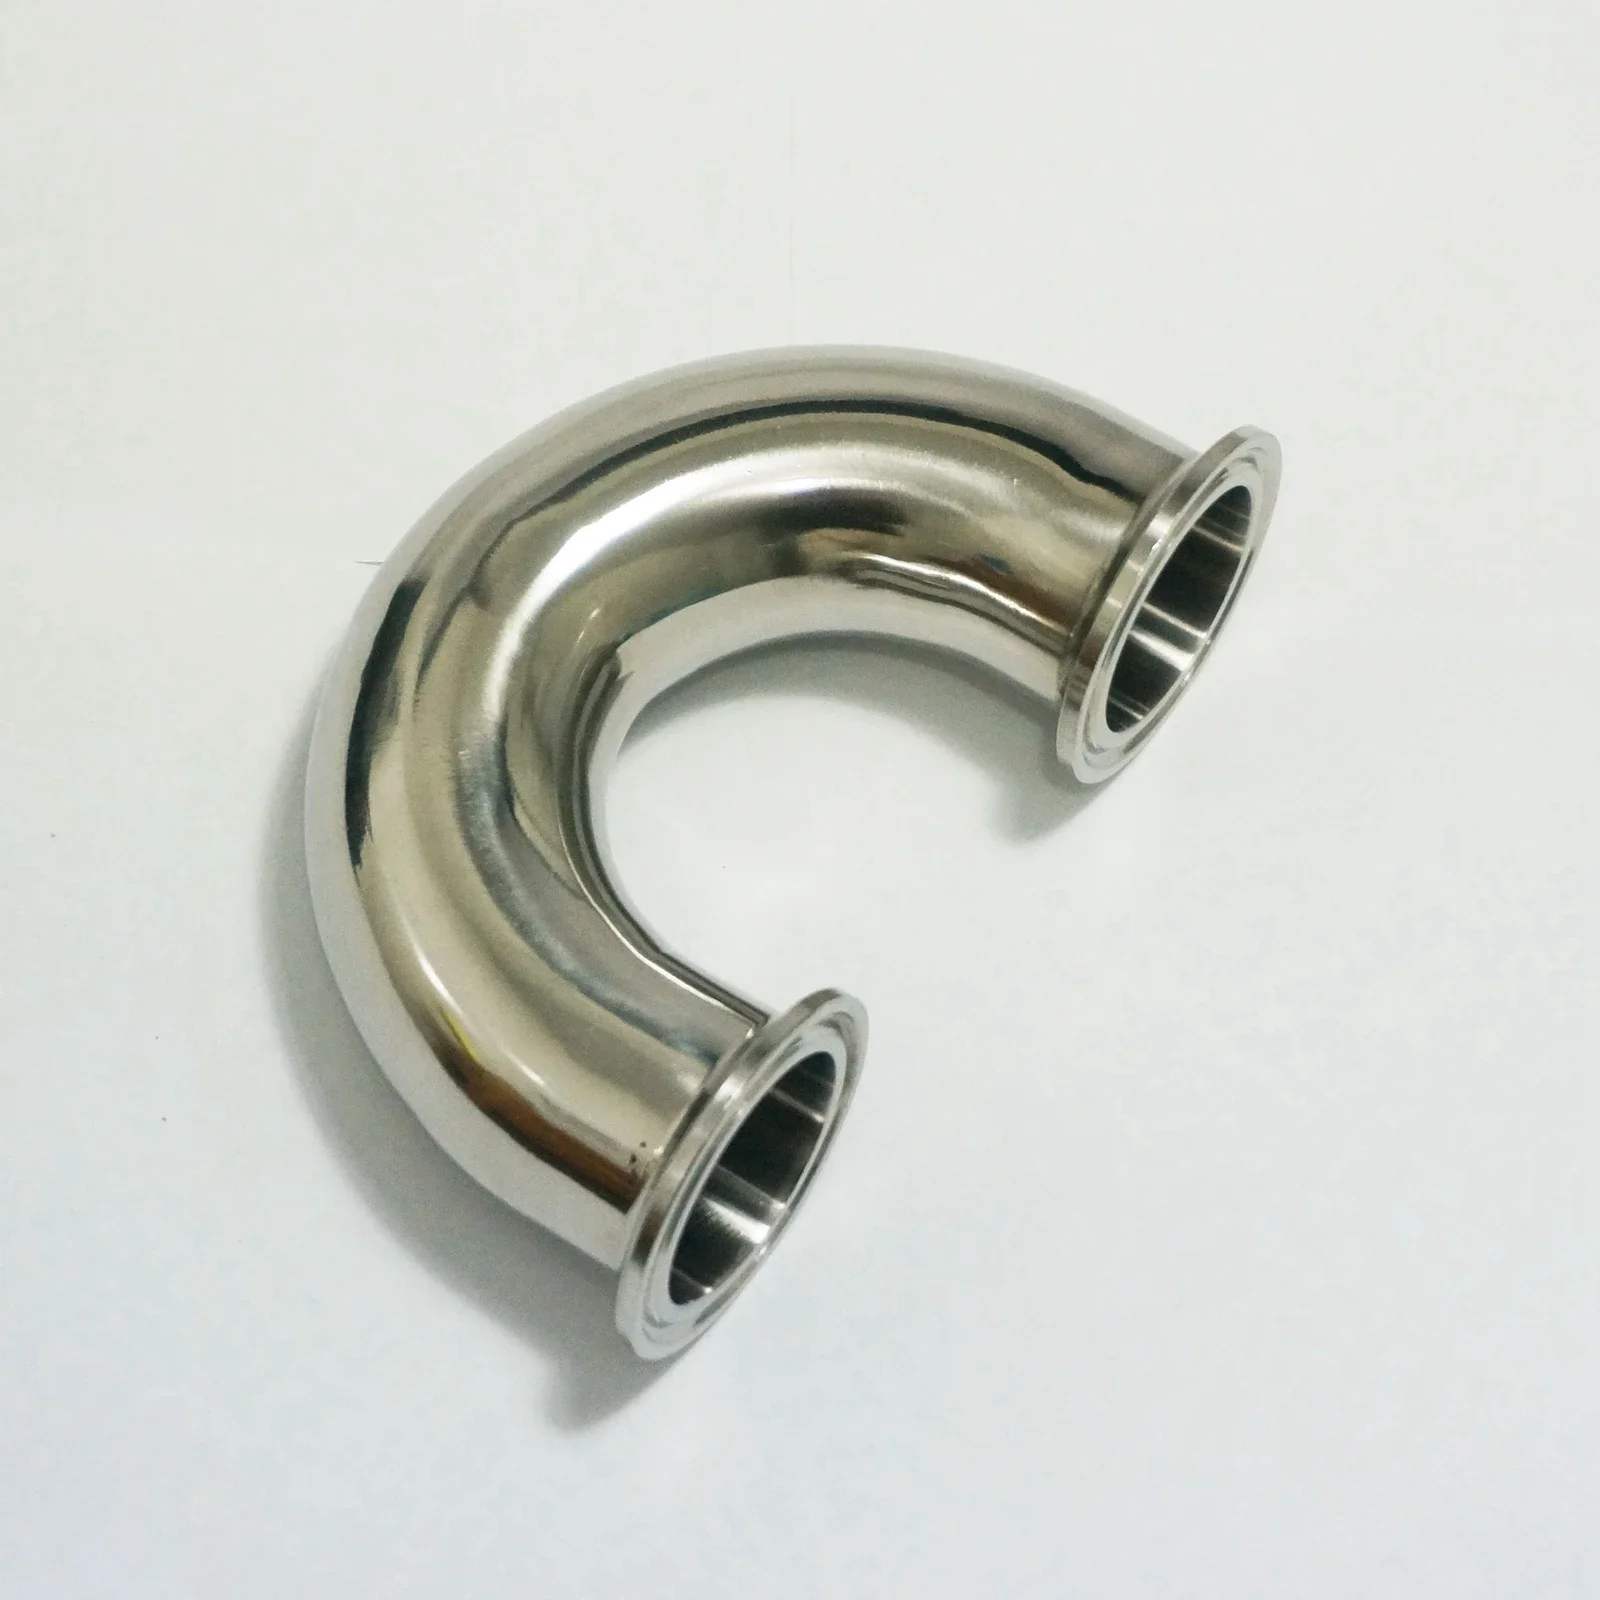 

Fit Tube O.D 38mm Ferrule OD 50.5mm 304 Stainless Steel Sanitary 180 Degree Elbow Pipe Fitting Tri Clamp